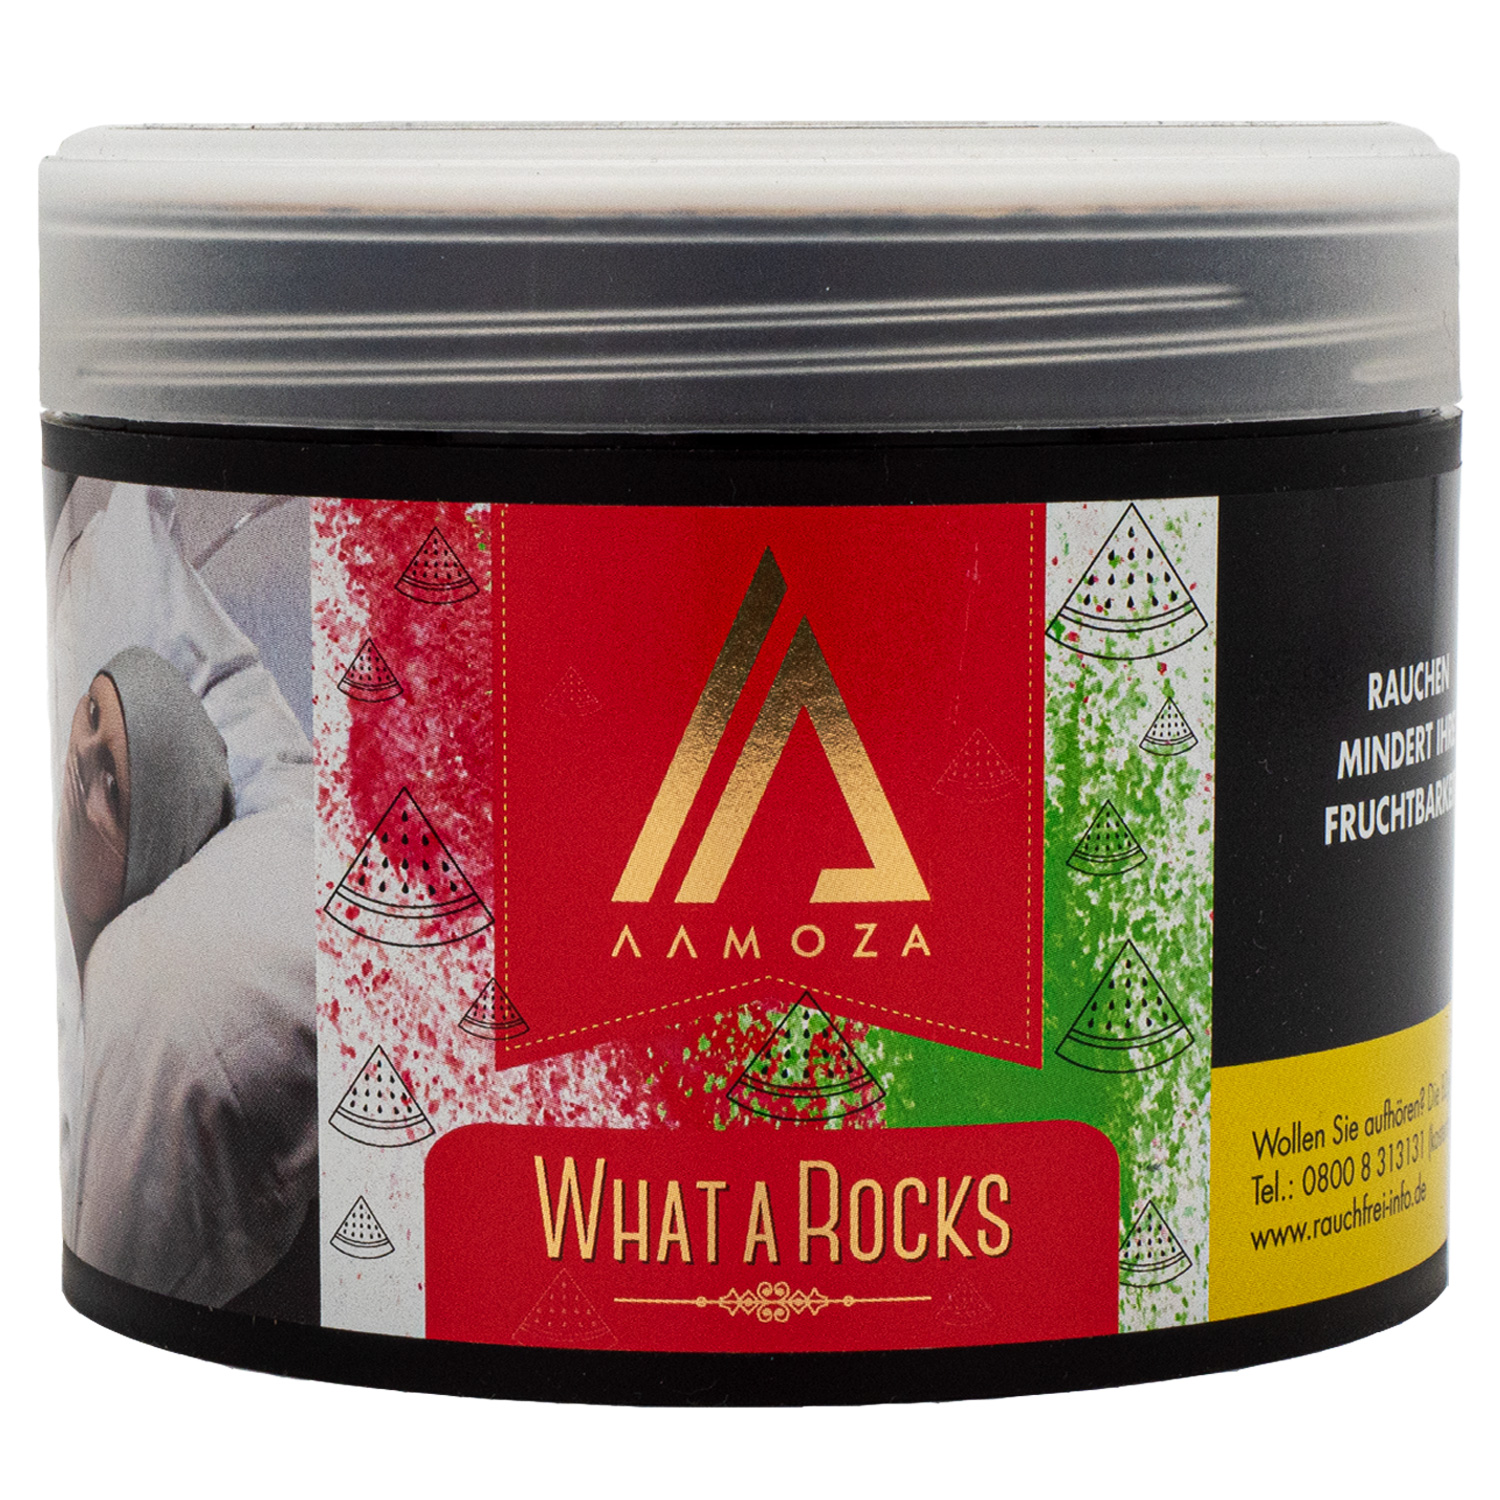 Aamoza | What a Rocks | 200g